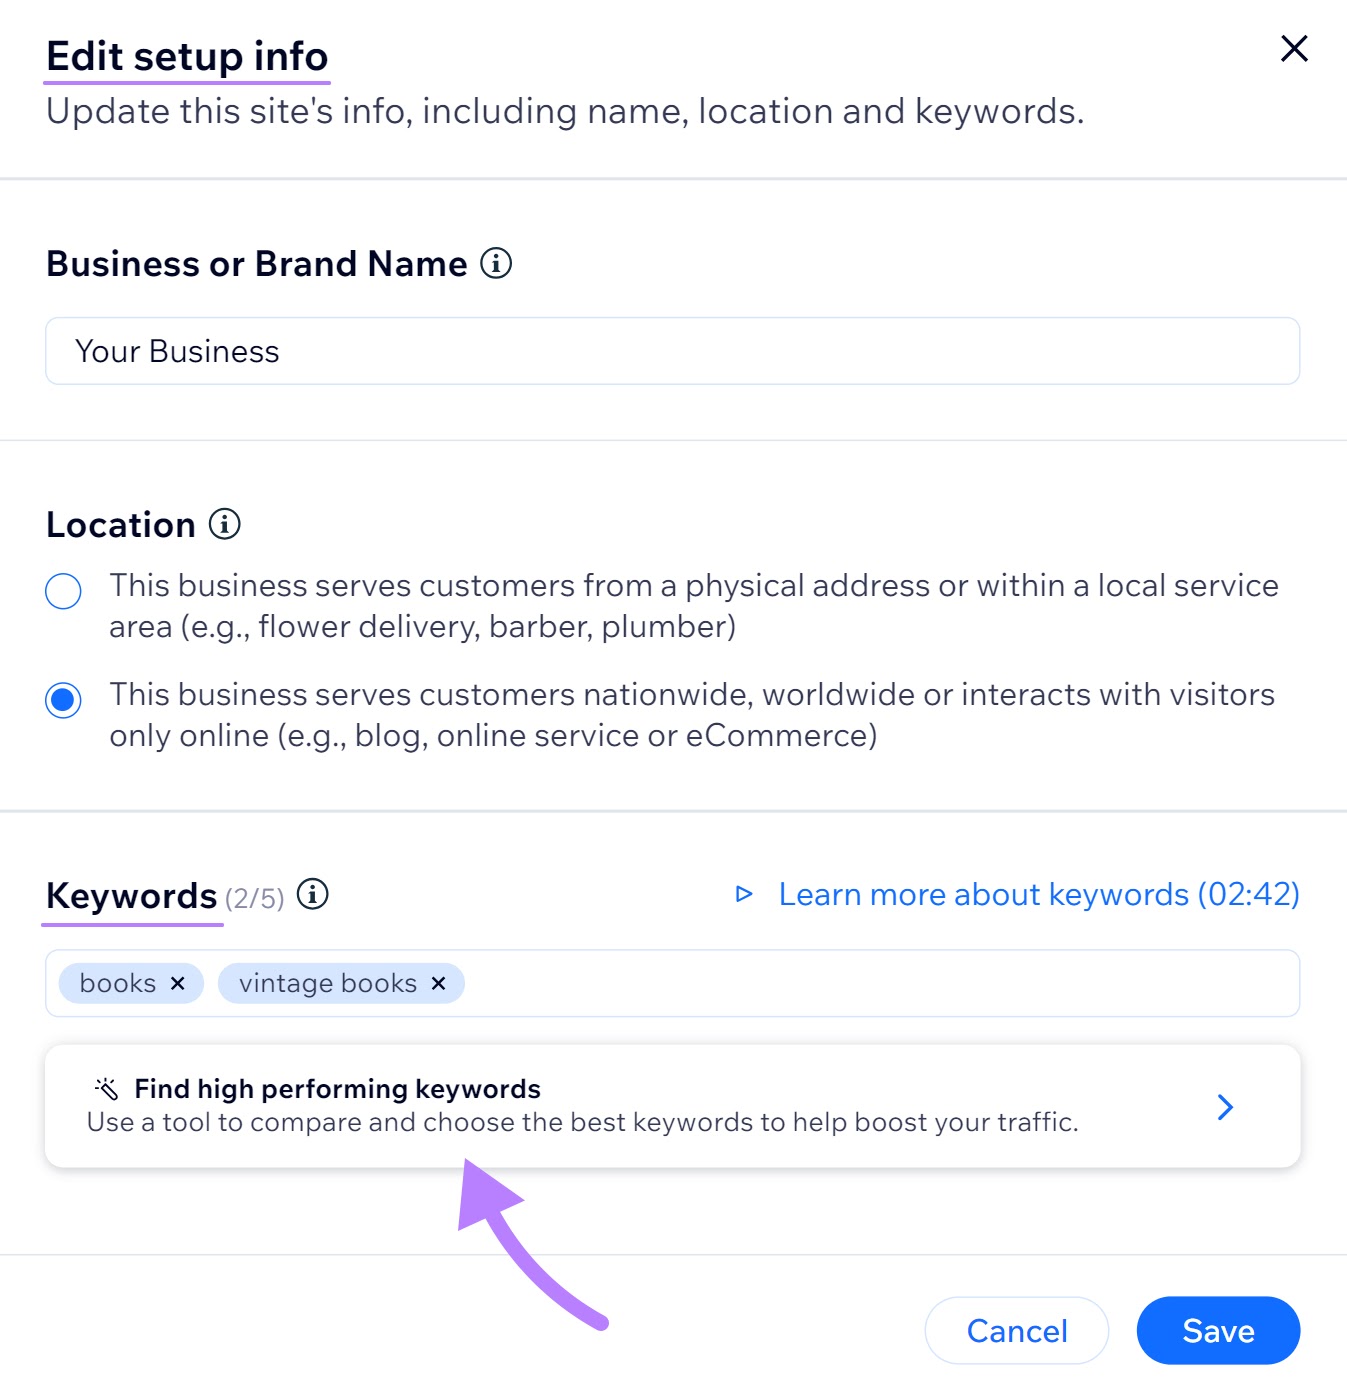 “Find high performing keywords” option highlighted in wix setup page